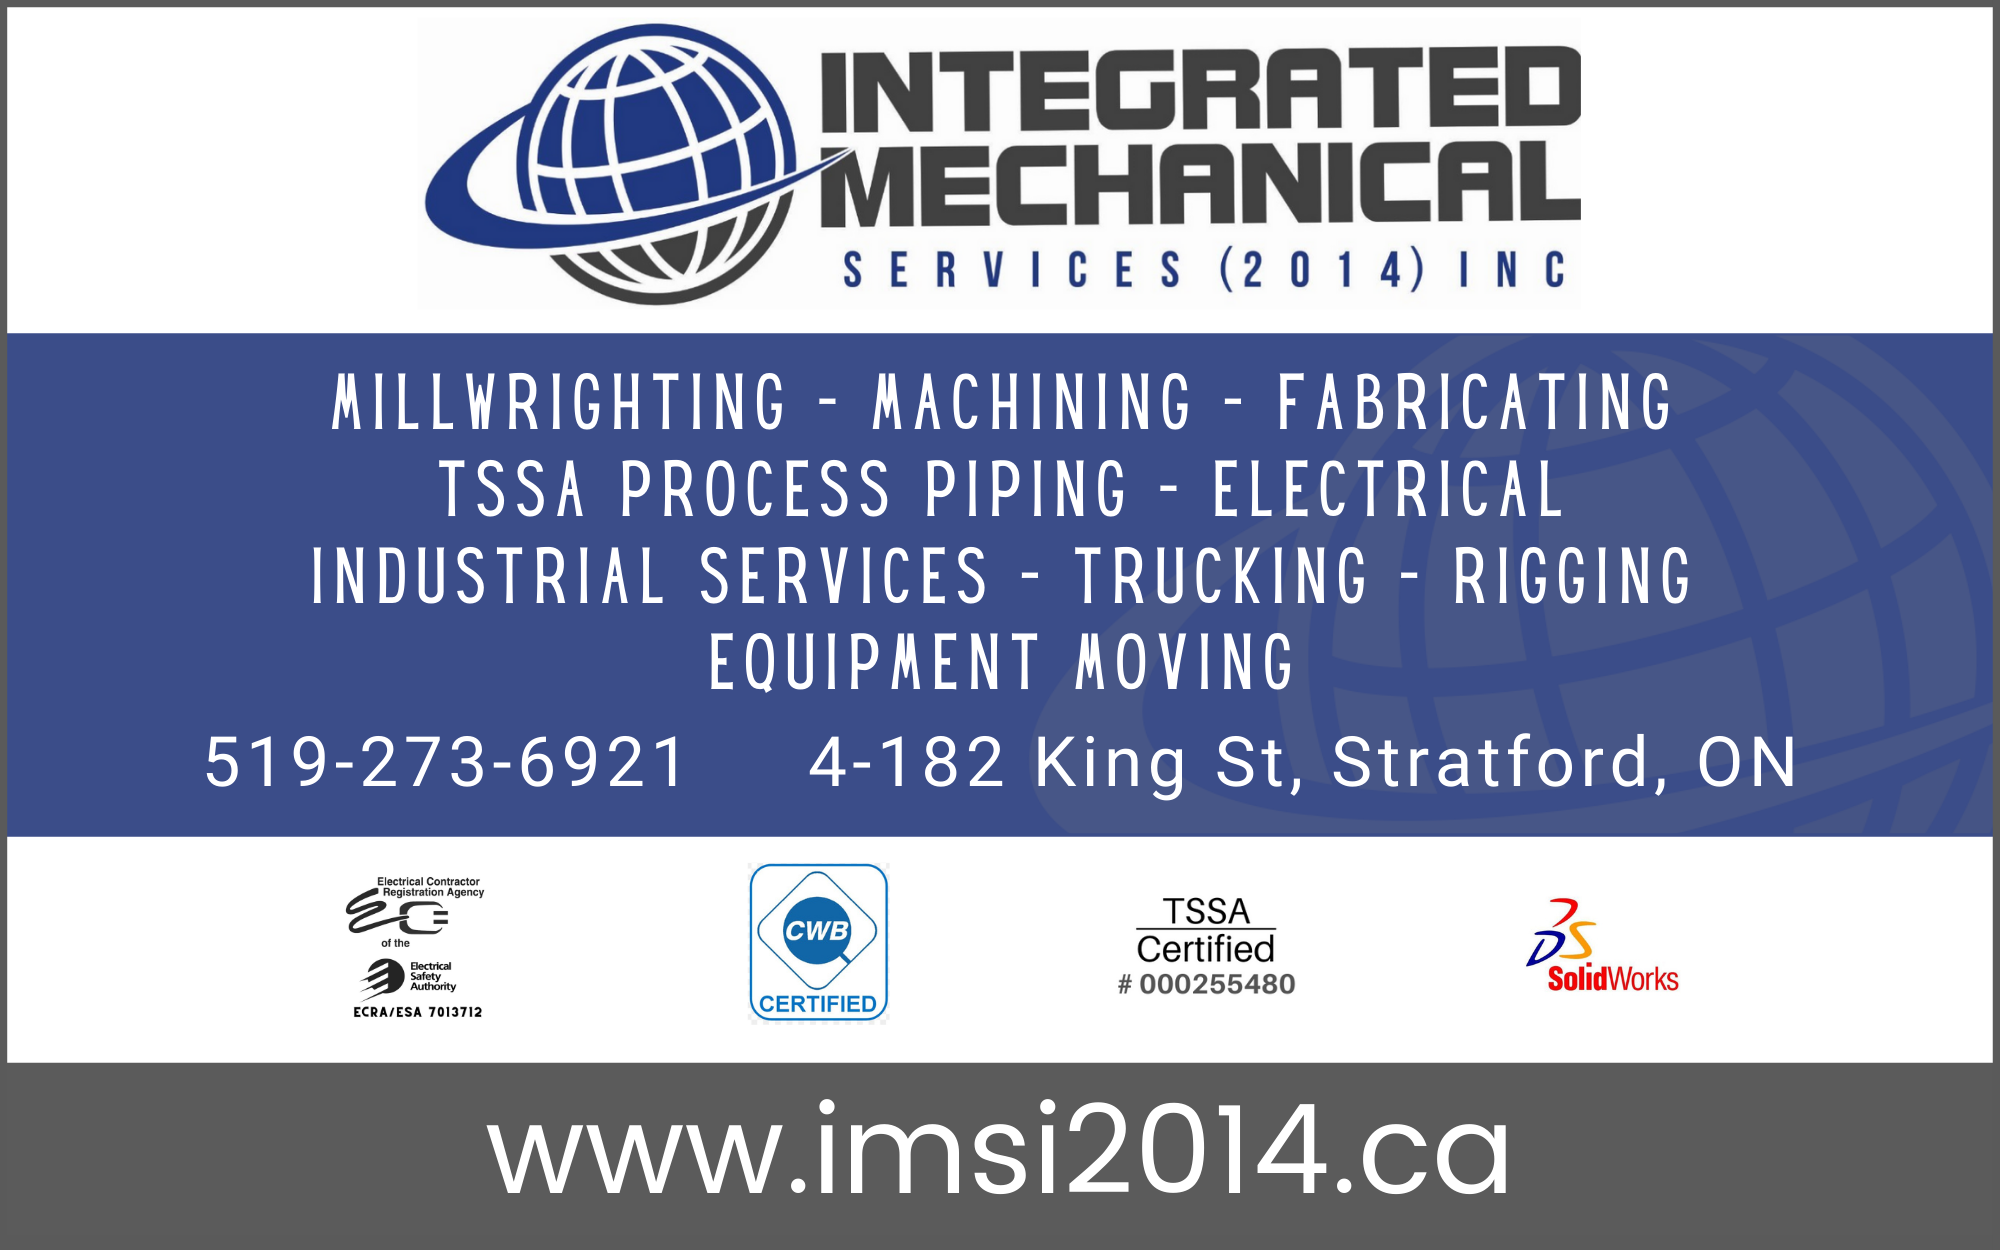 Integrated Mechanical Services